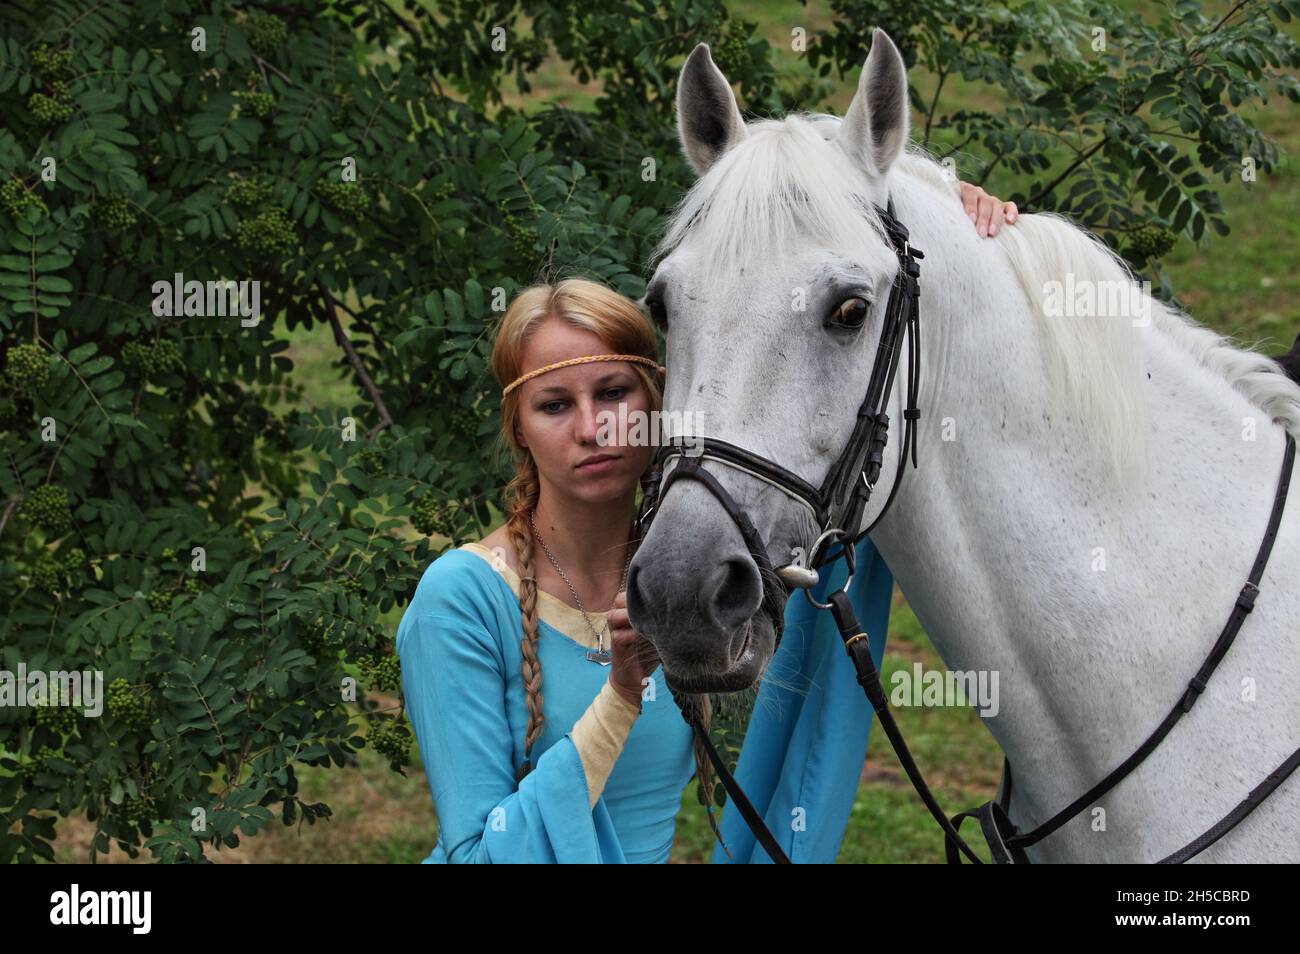 Young equestrian model in a blue dress posing with white horse Stock Photo